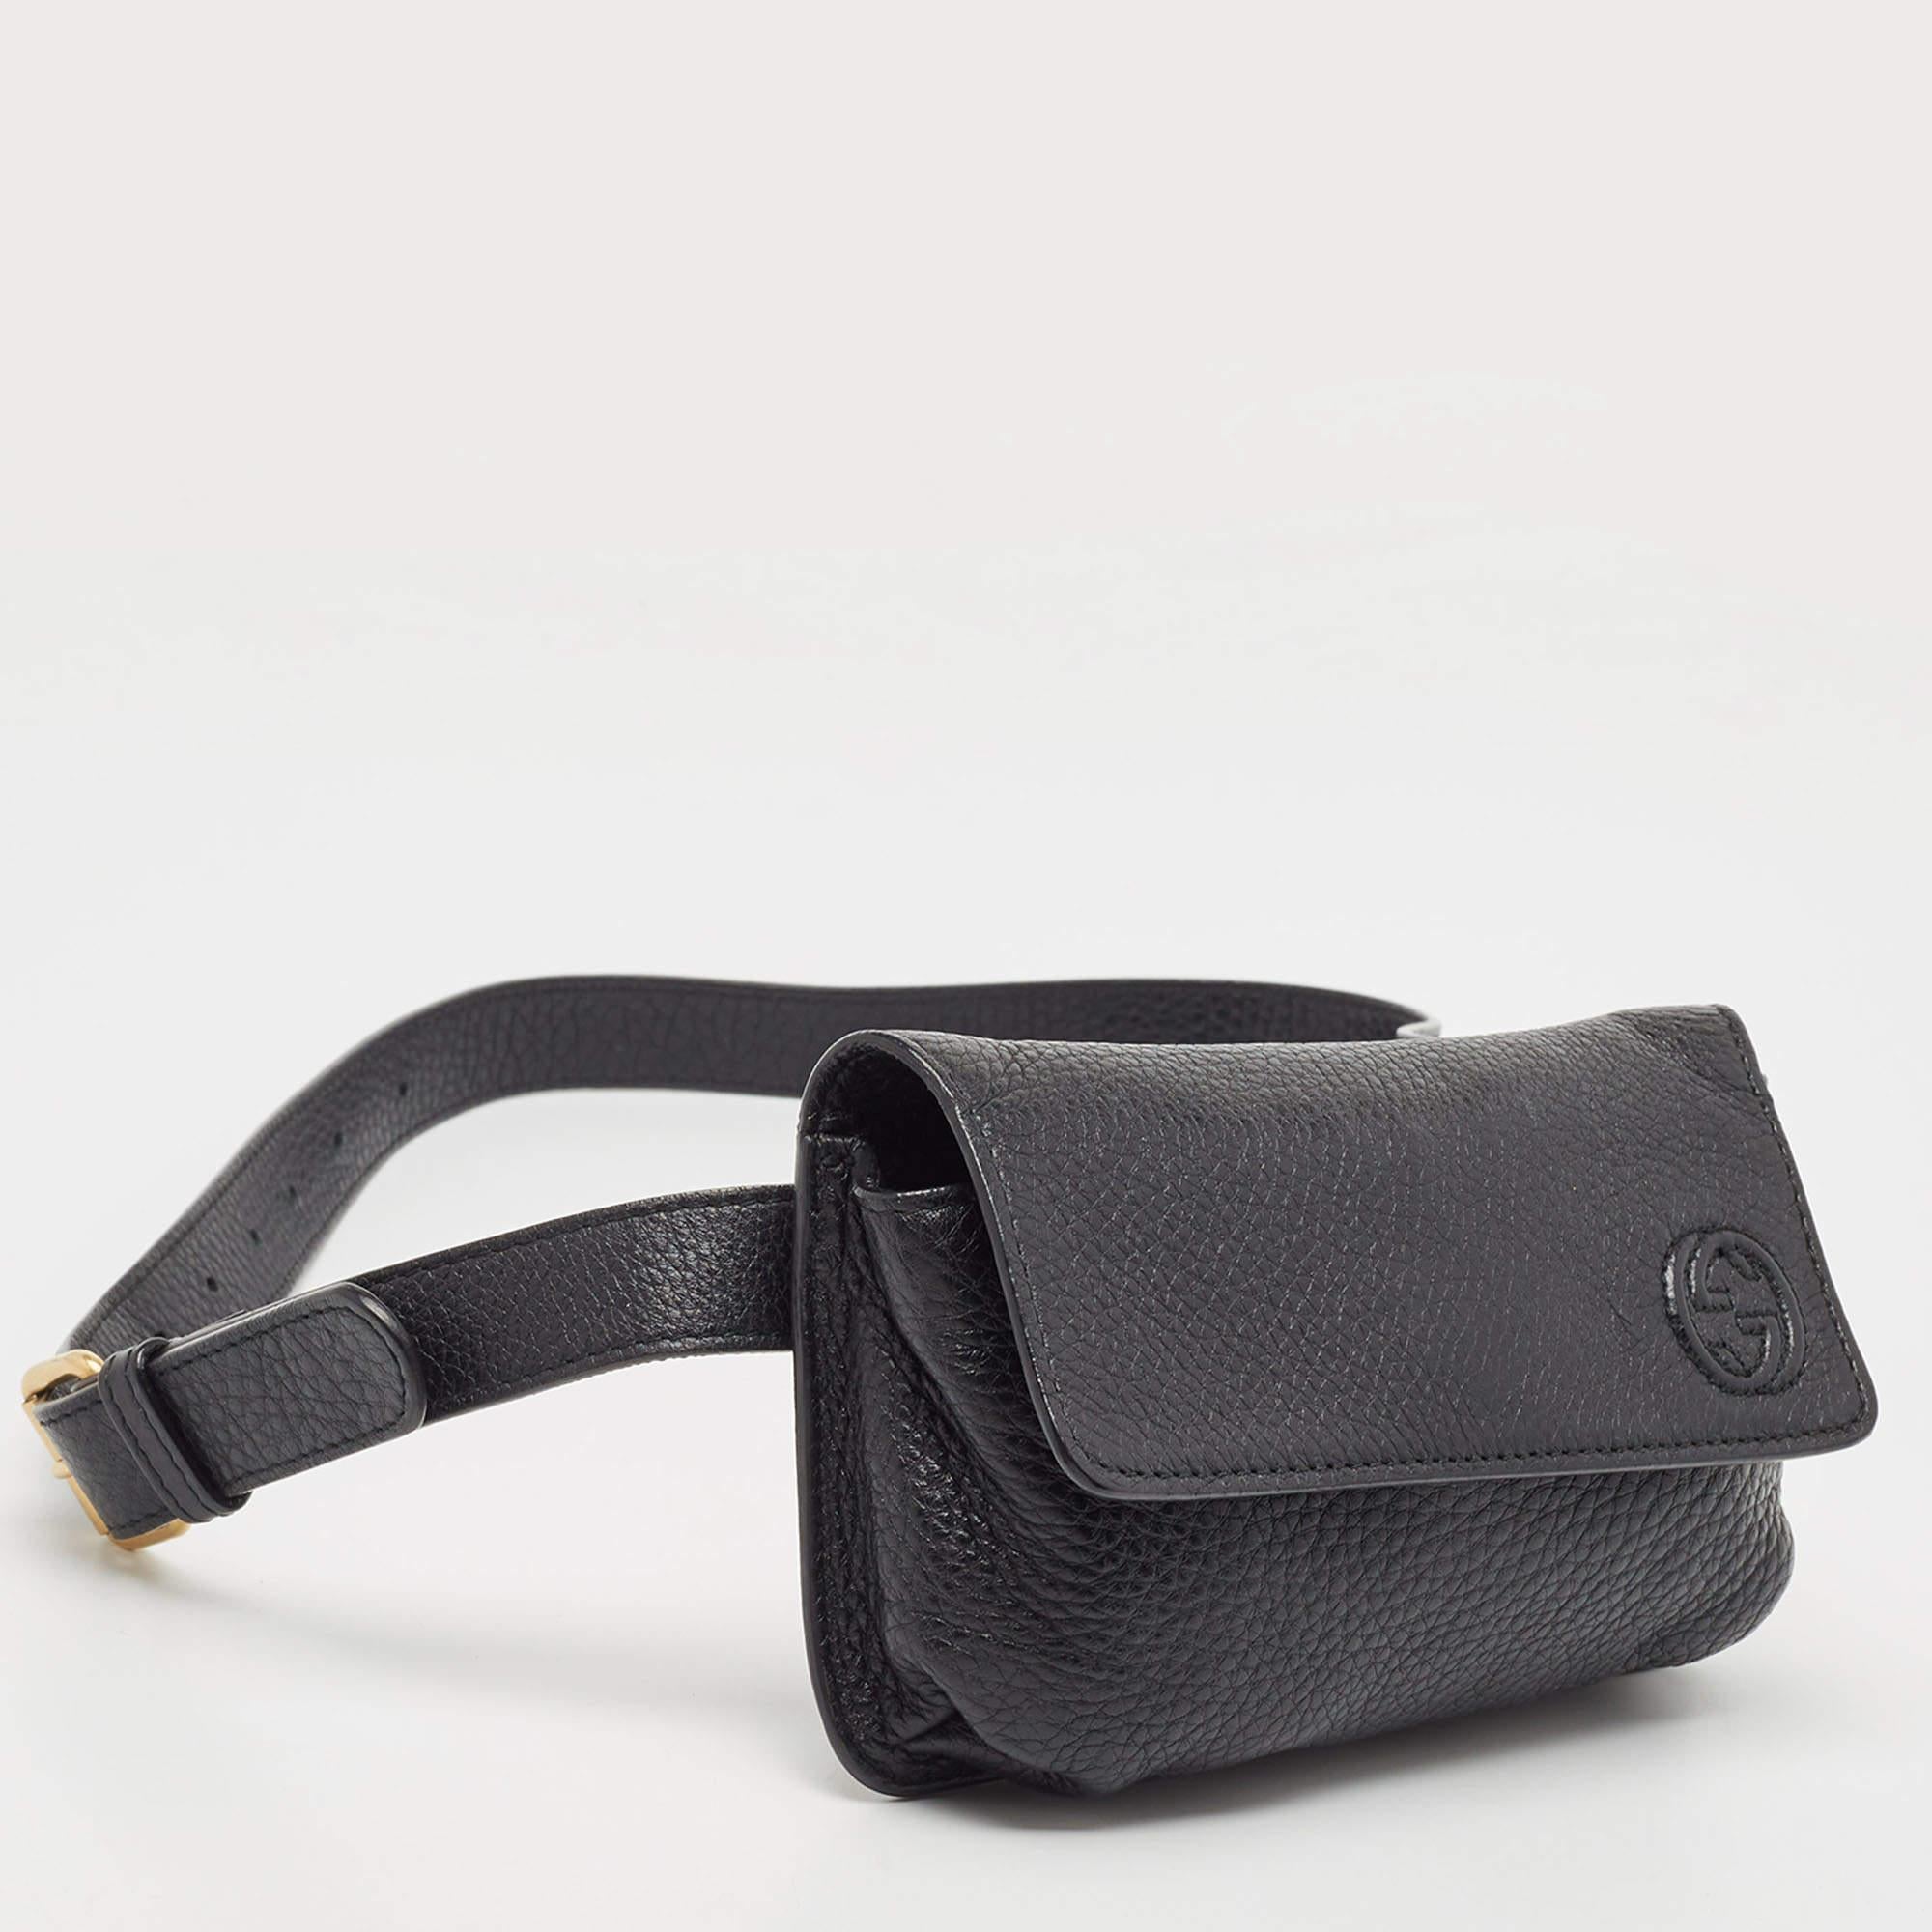 Crafted from supple black leather, the Gucci Soho Belt Bag epitomizes luxury and functionality. With its sleek design and iconic interlocking G logo, it exudes sophistication. This versatile accessory can be worn around the waist or across the body,